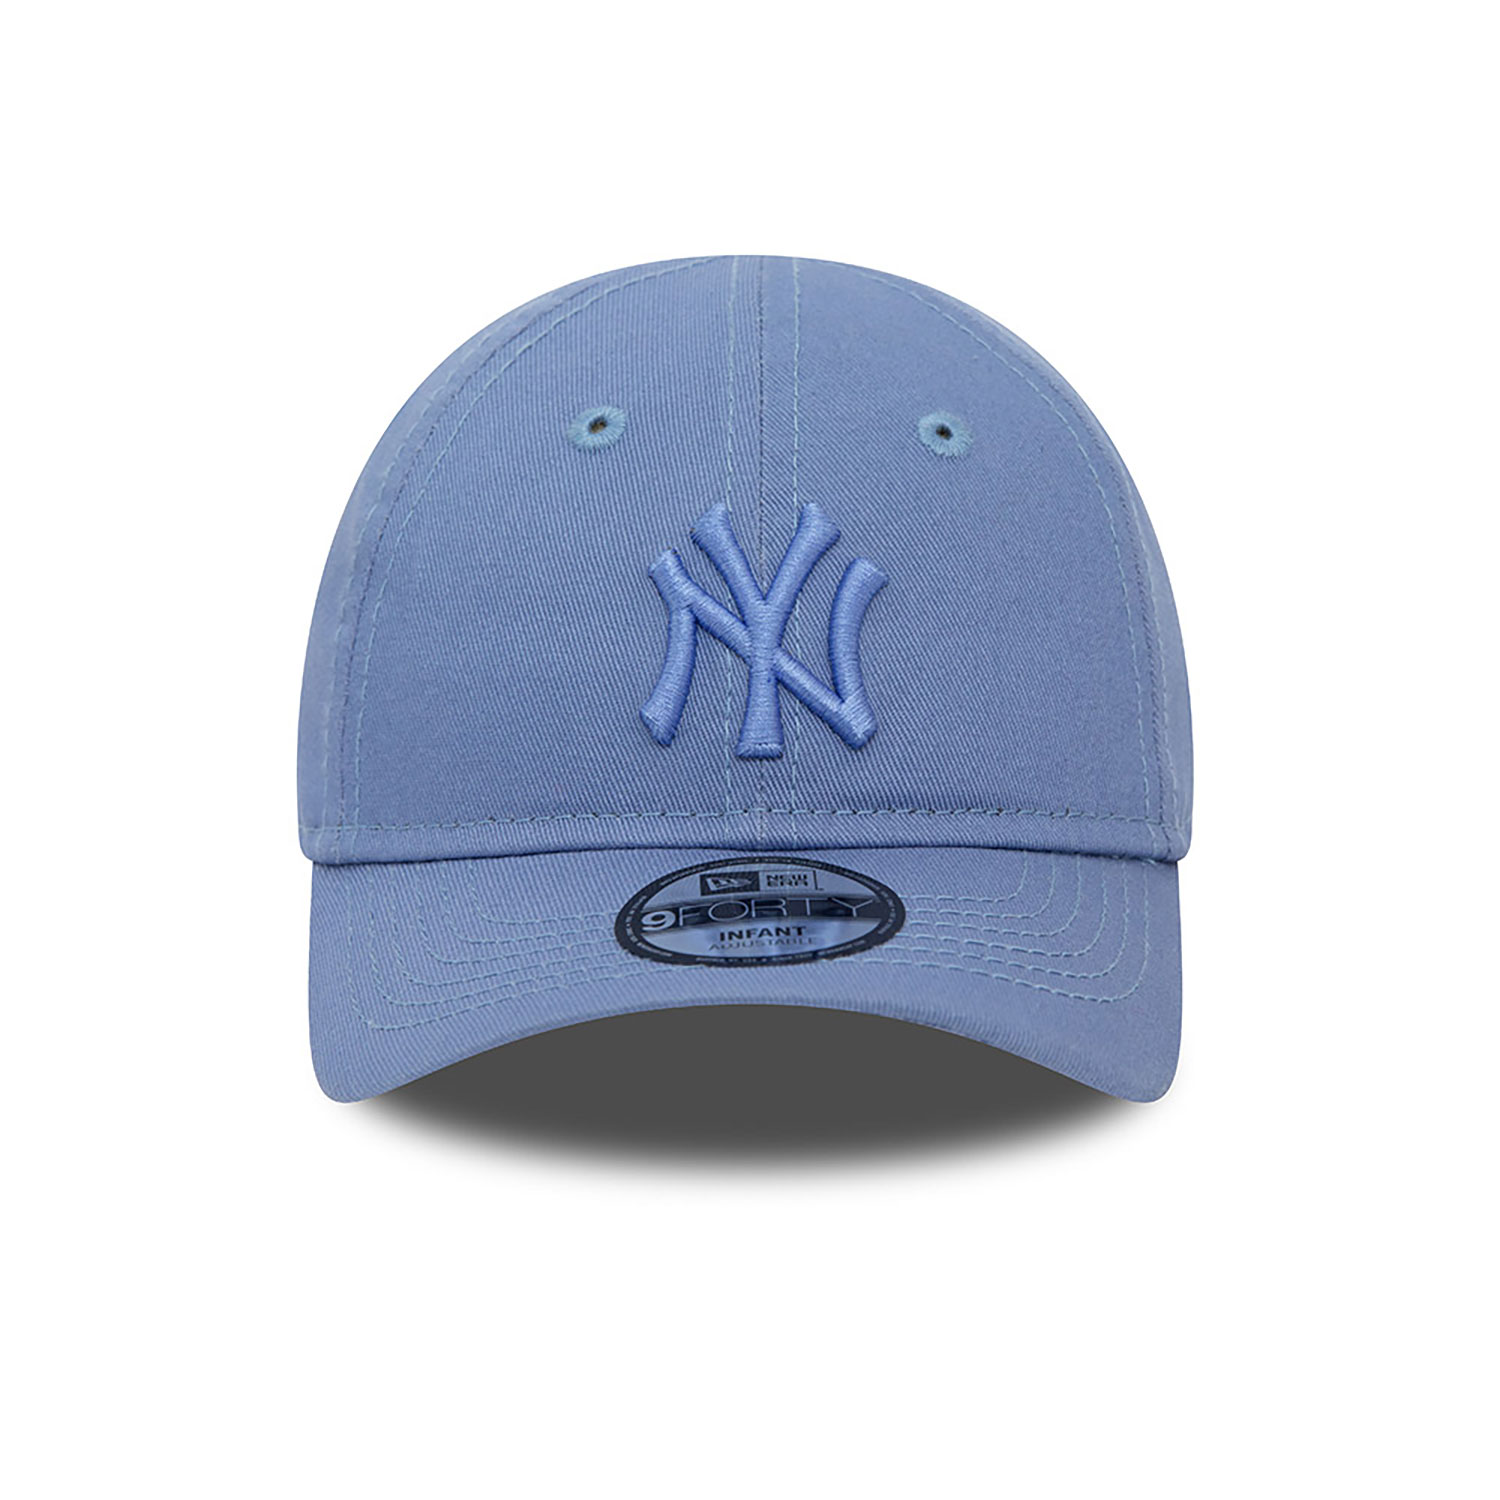 New York Yankees Infant League Essential Blue 9FORTY Adjustable Cap